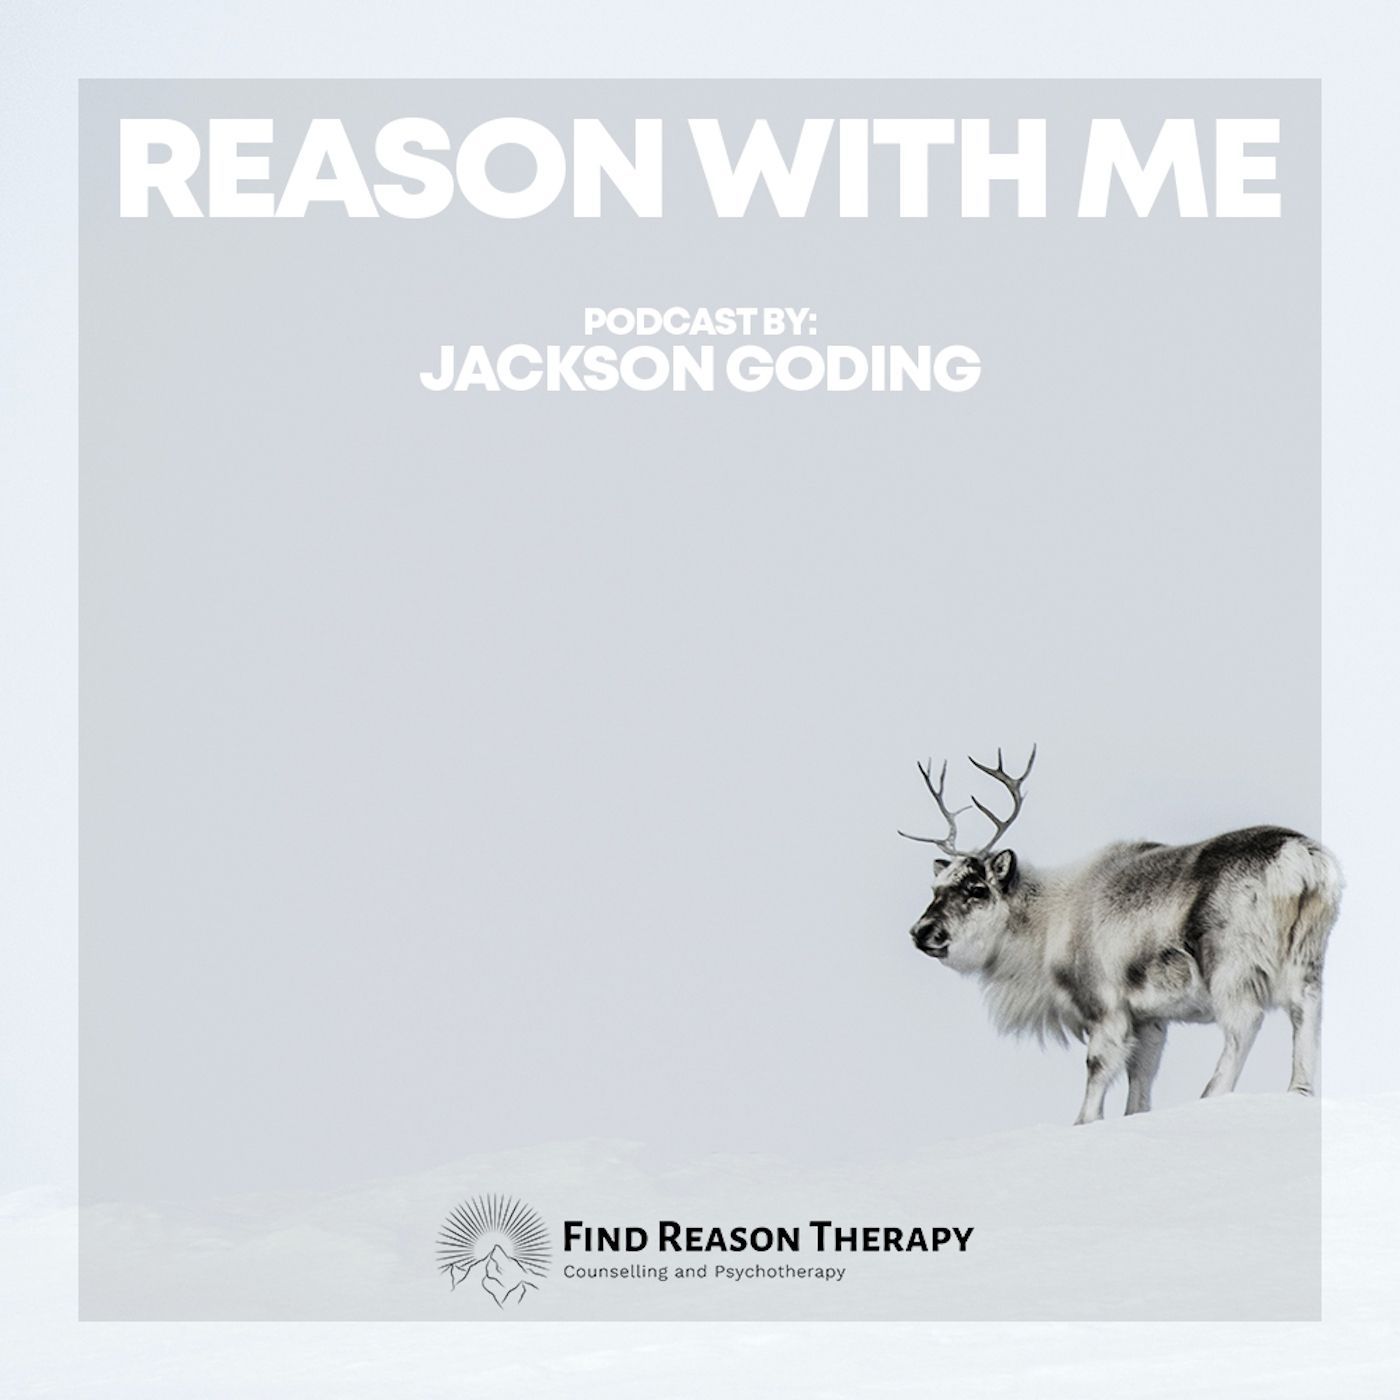 Gallery Photo of Reason With Me Podcast 